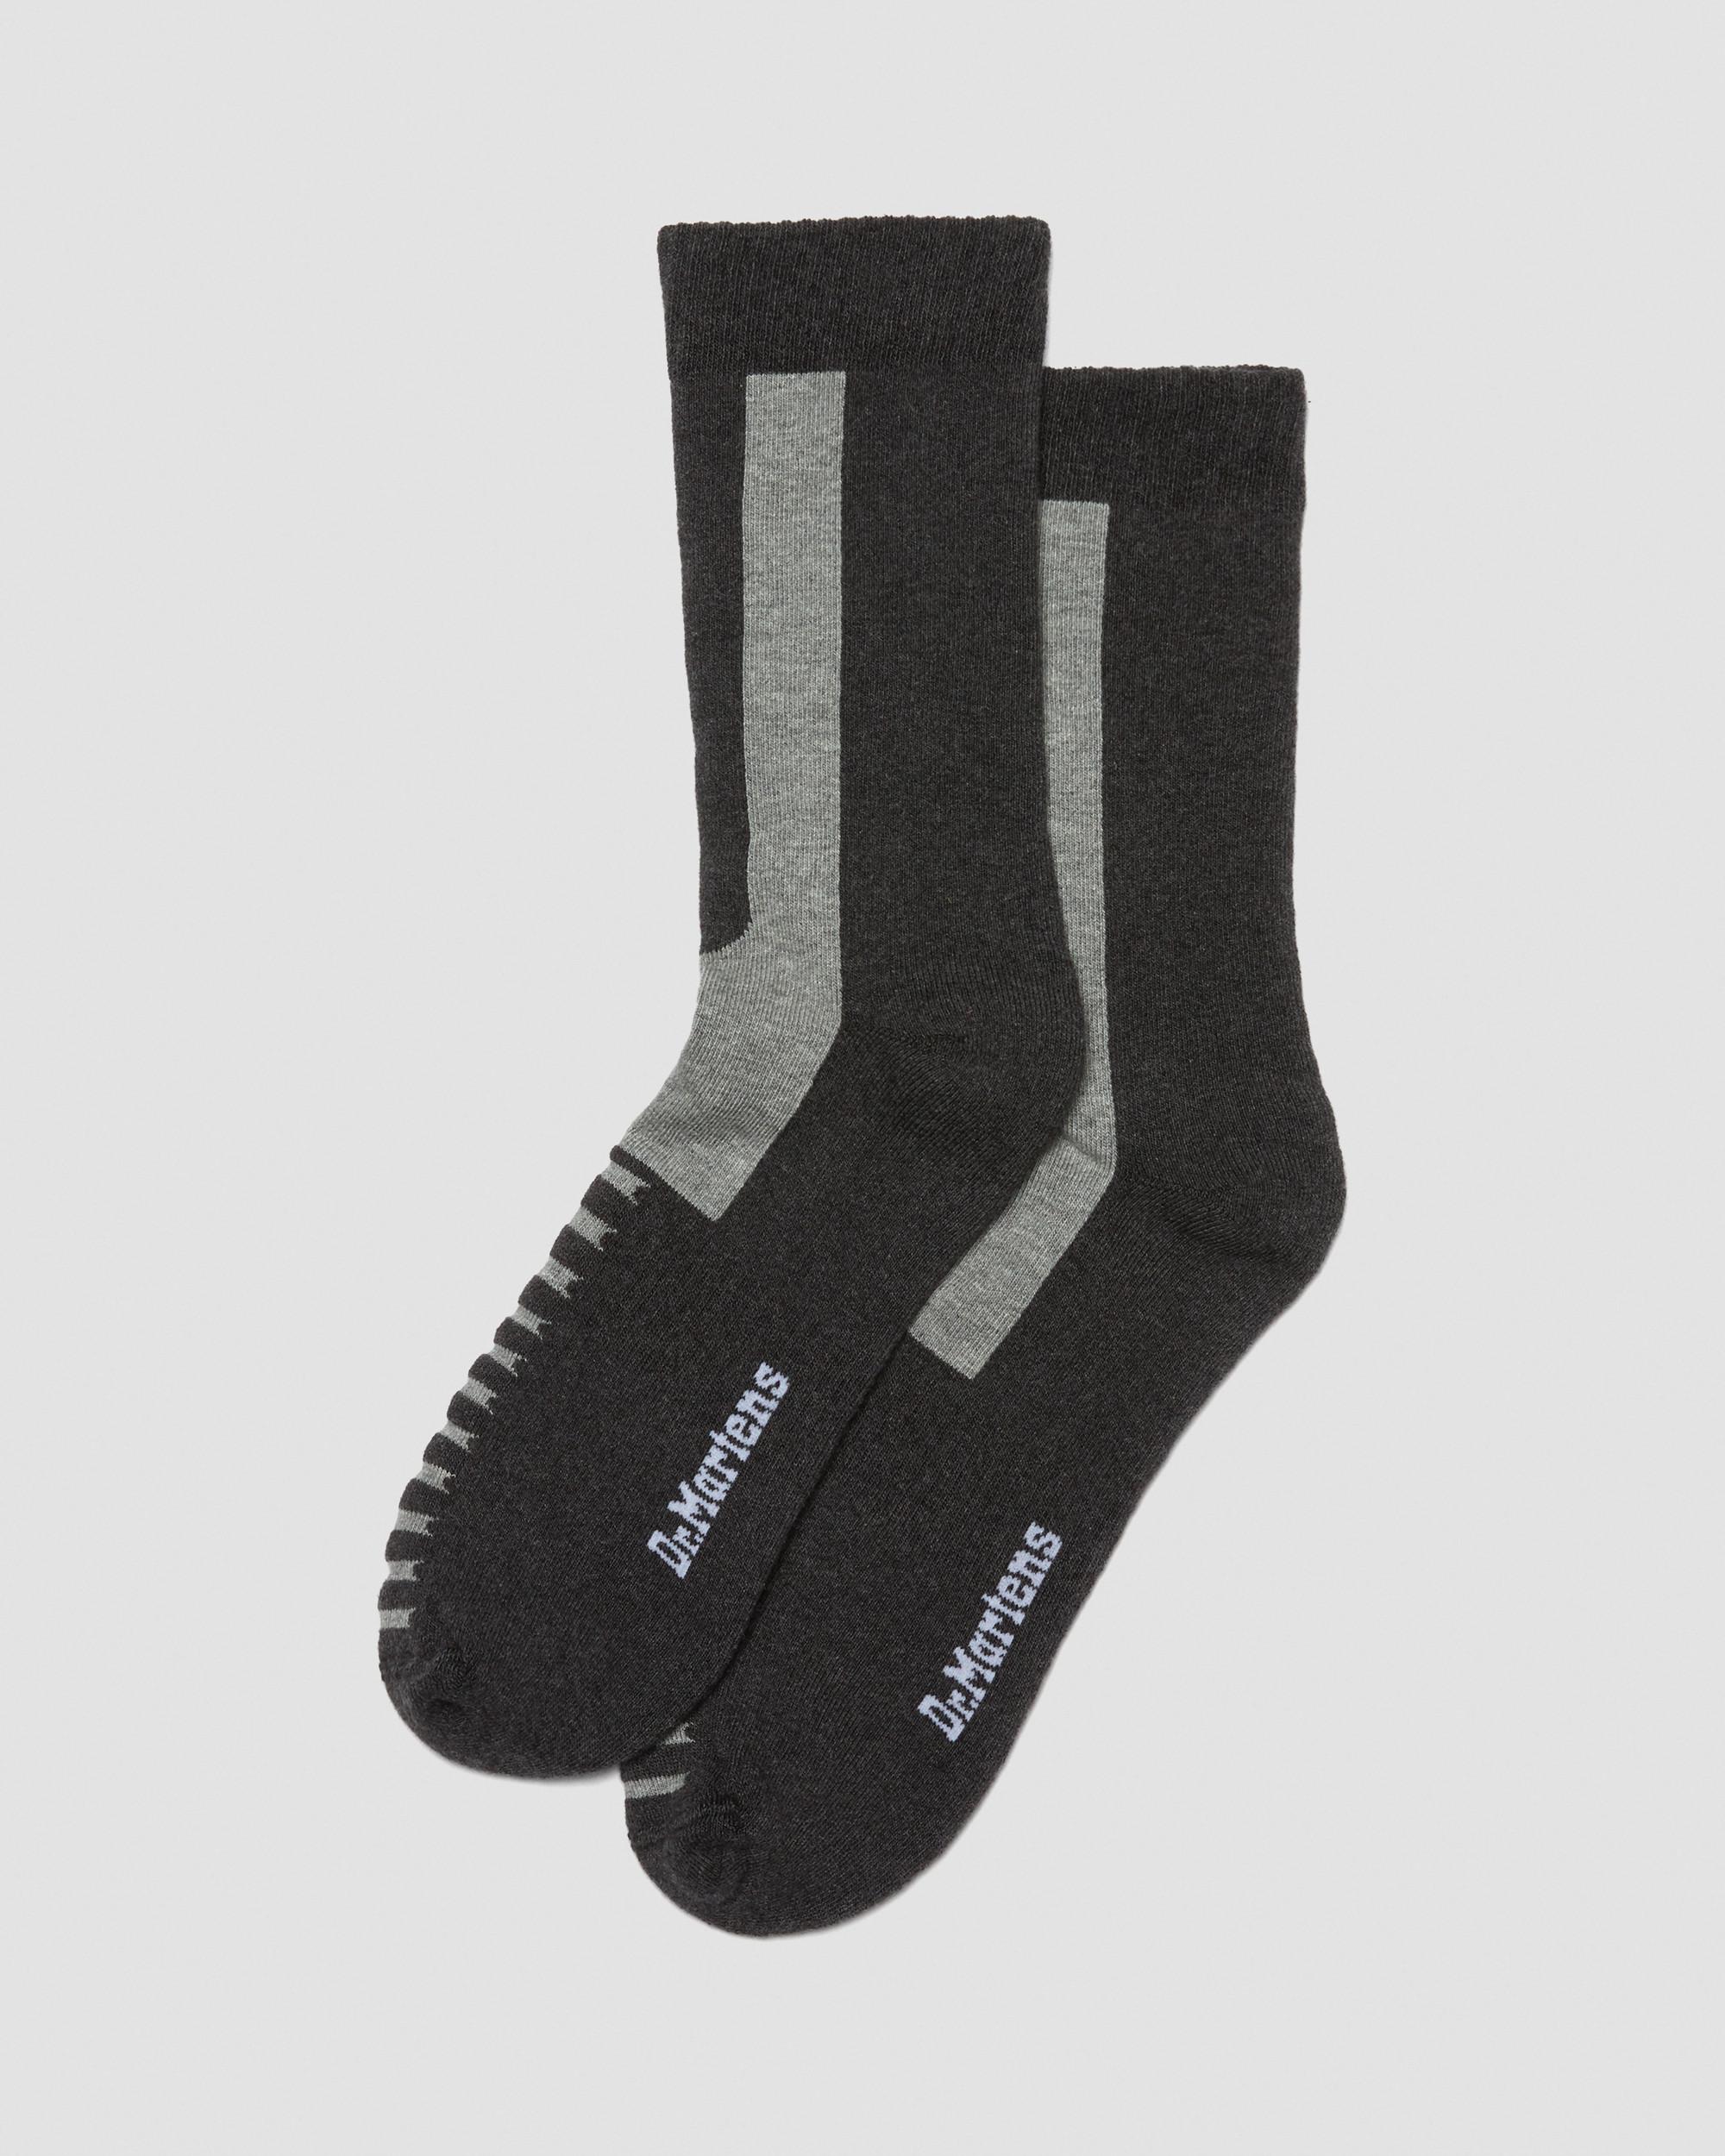 Double Doc Cotton Blend Socks in Charcoal | Dr. Martens